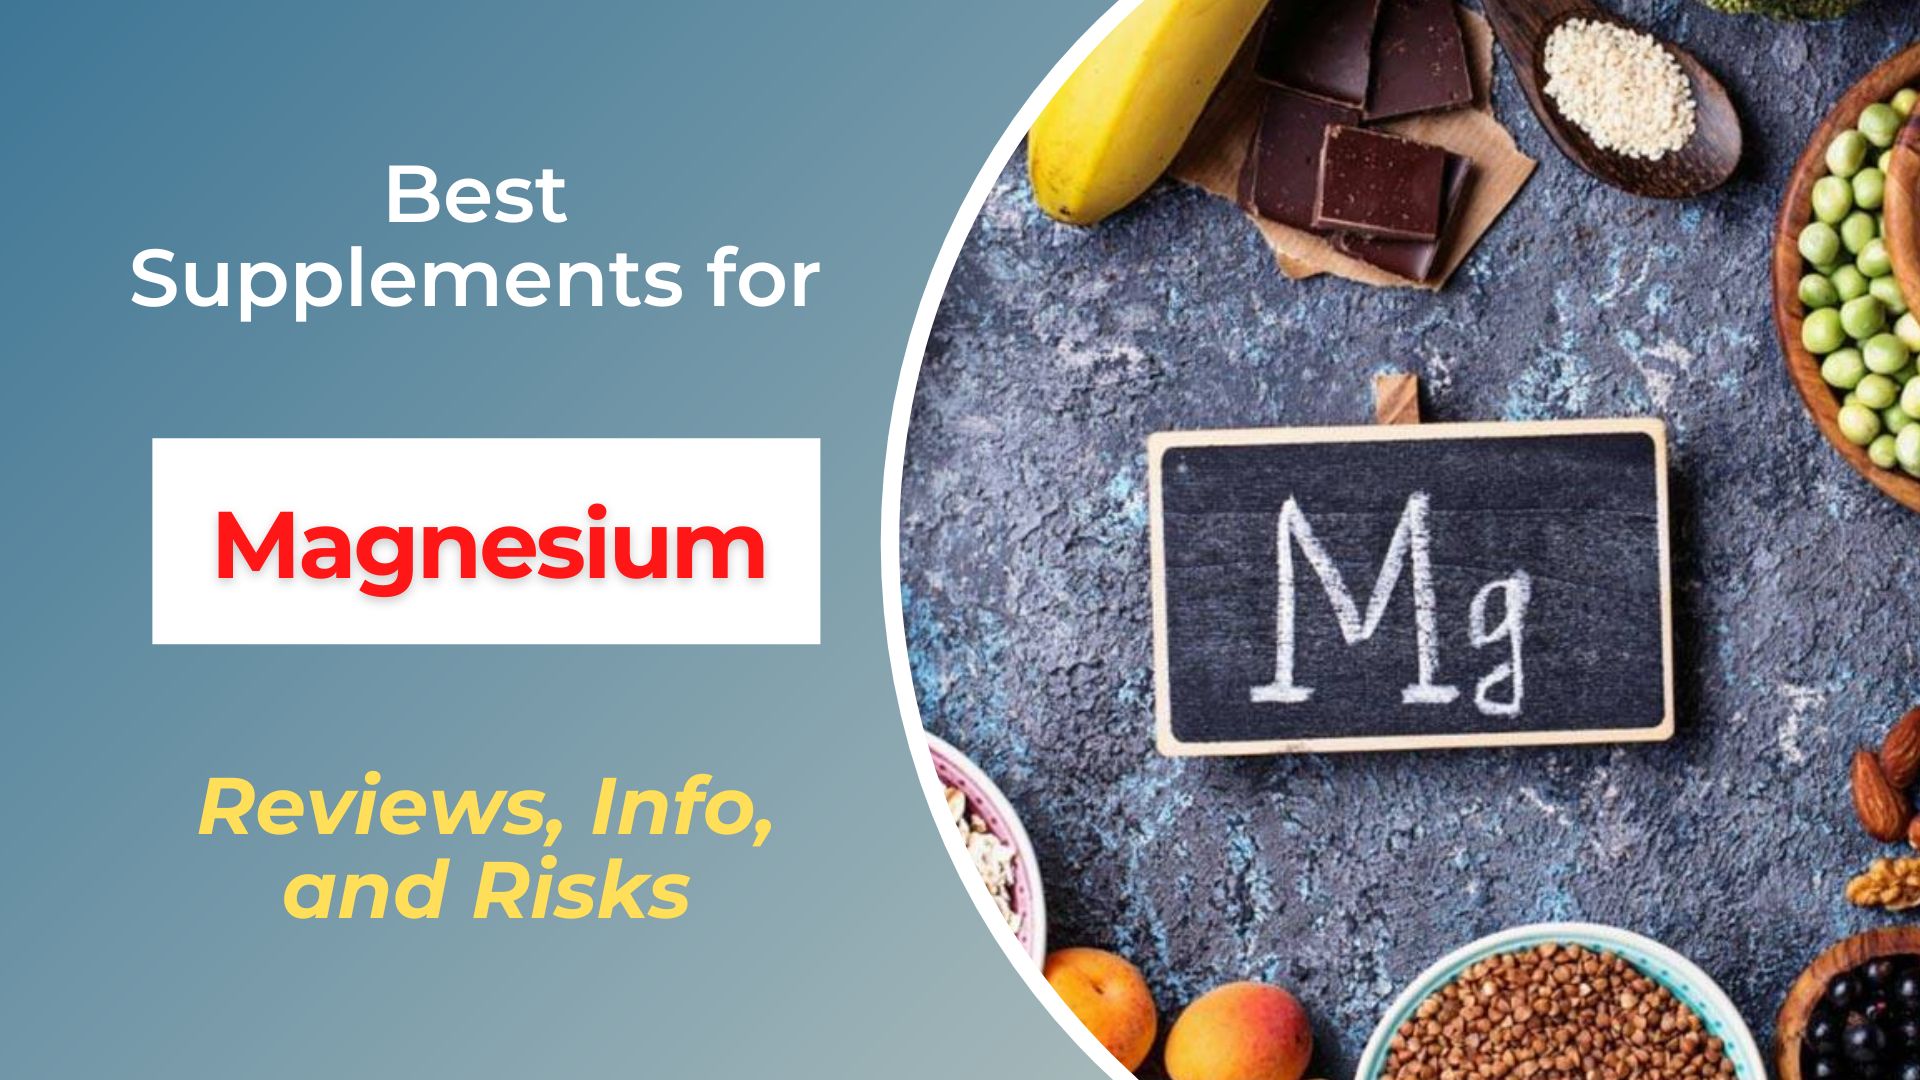 Best Supplements for Magnesium